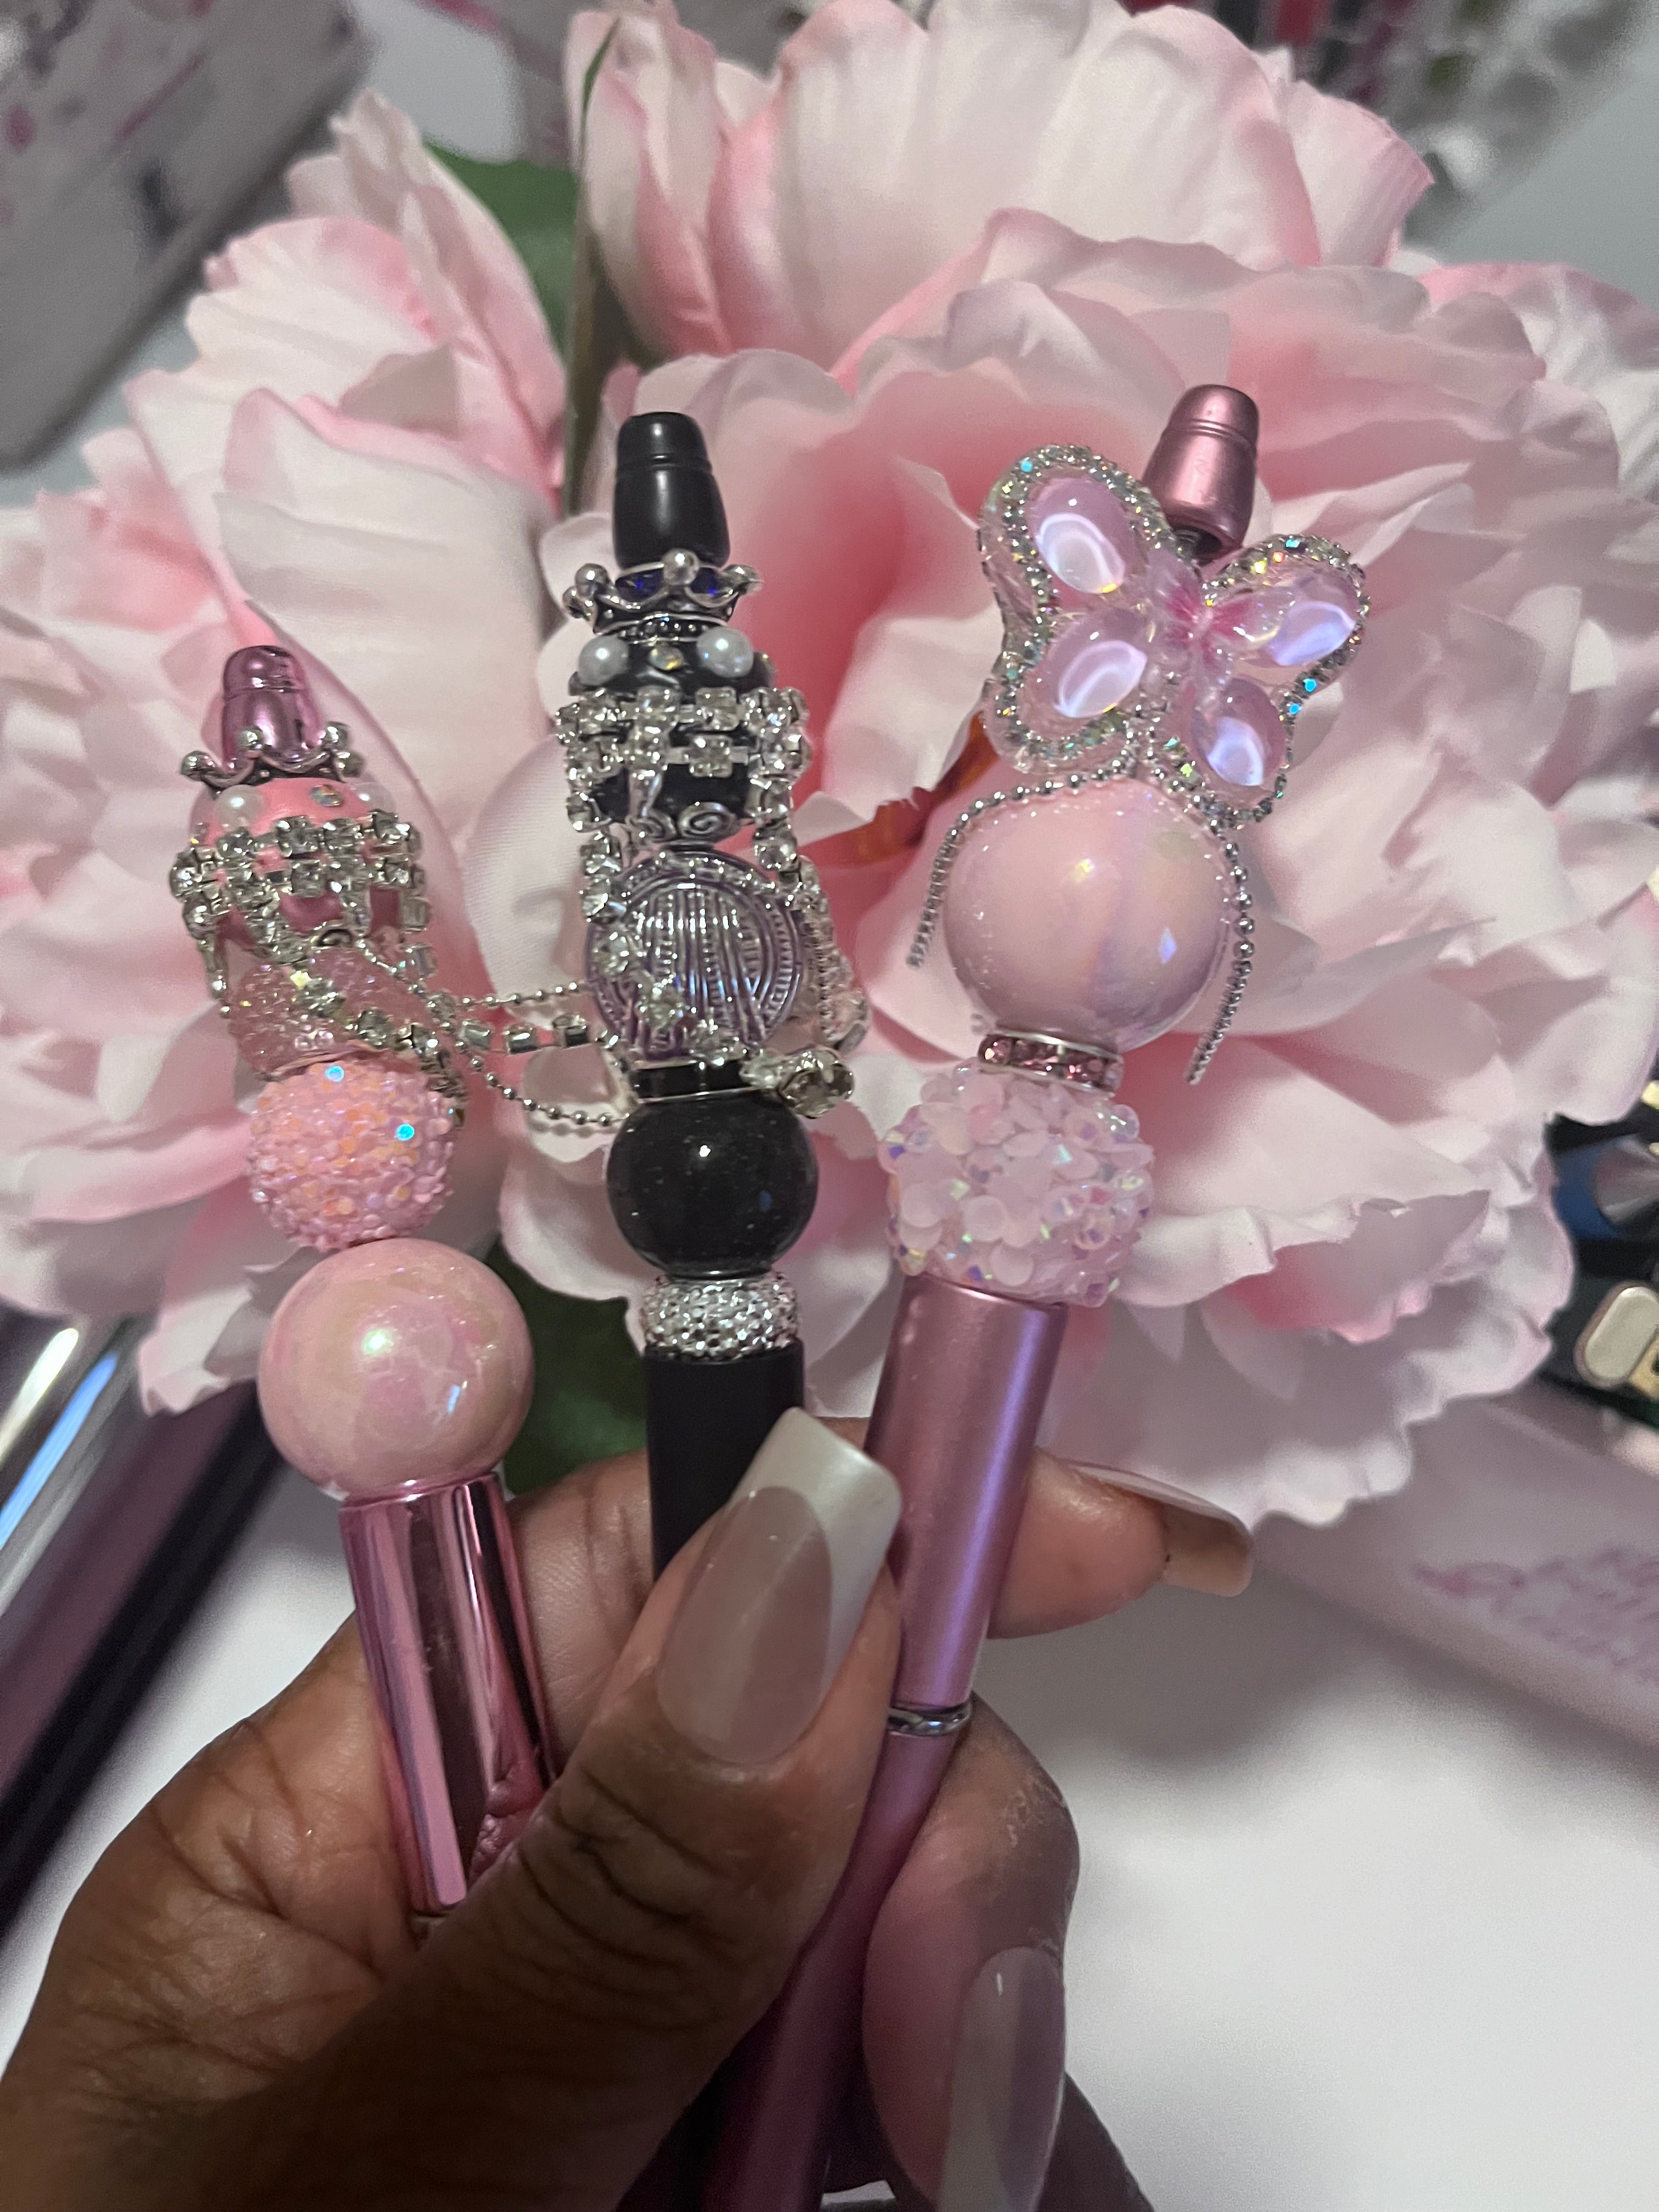 Custom Beaded Pens - Fashion Focal Pens, Pretty Pens, Fancy Bling Pens, Themed Beaded Pen, Pen Collector, Gifts for Writers